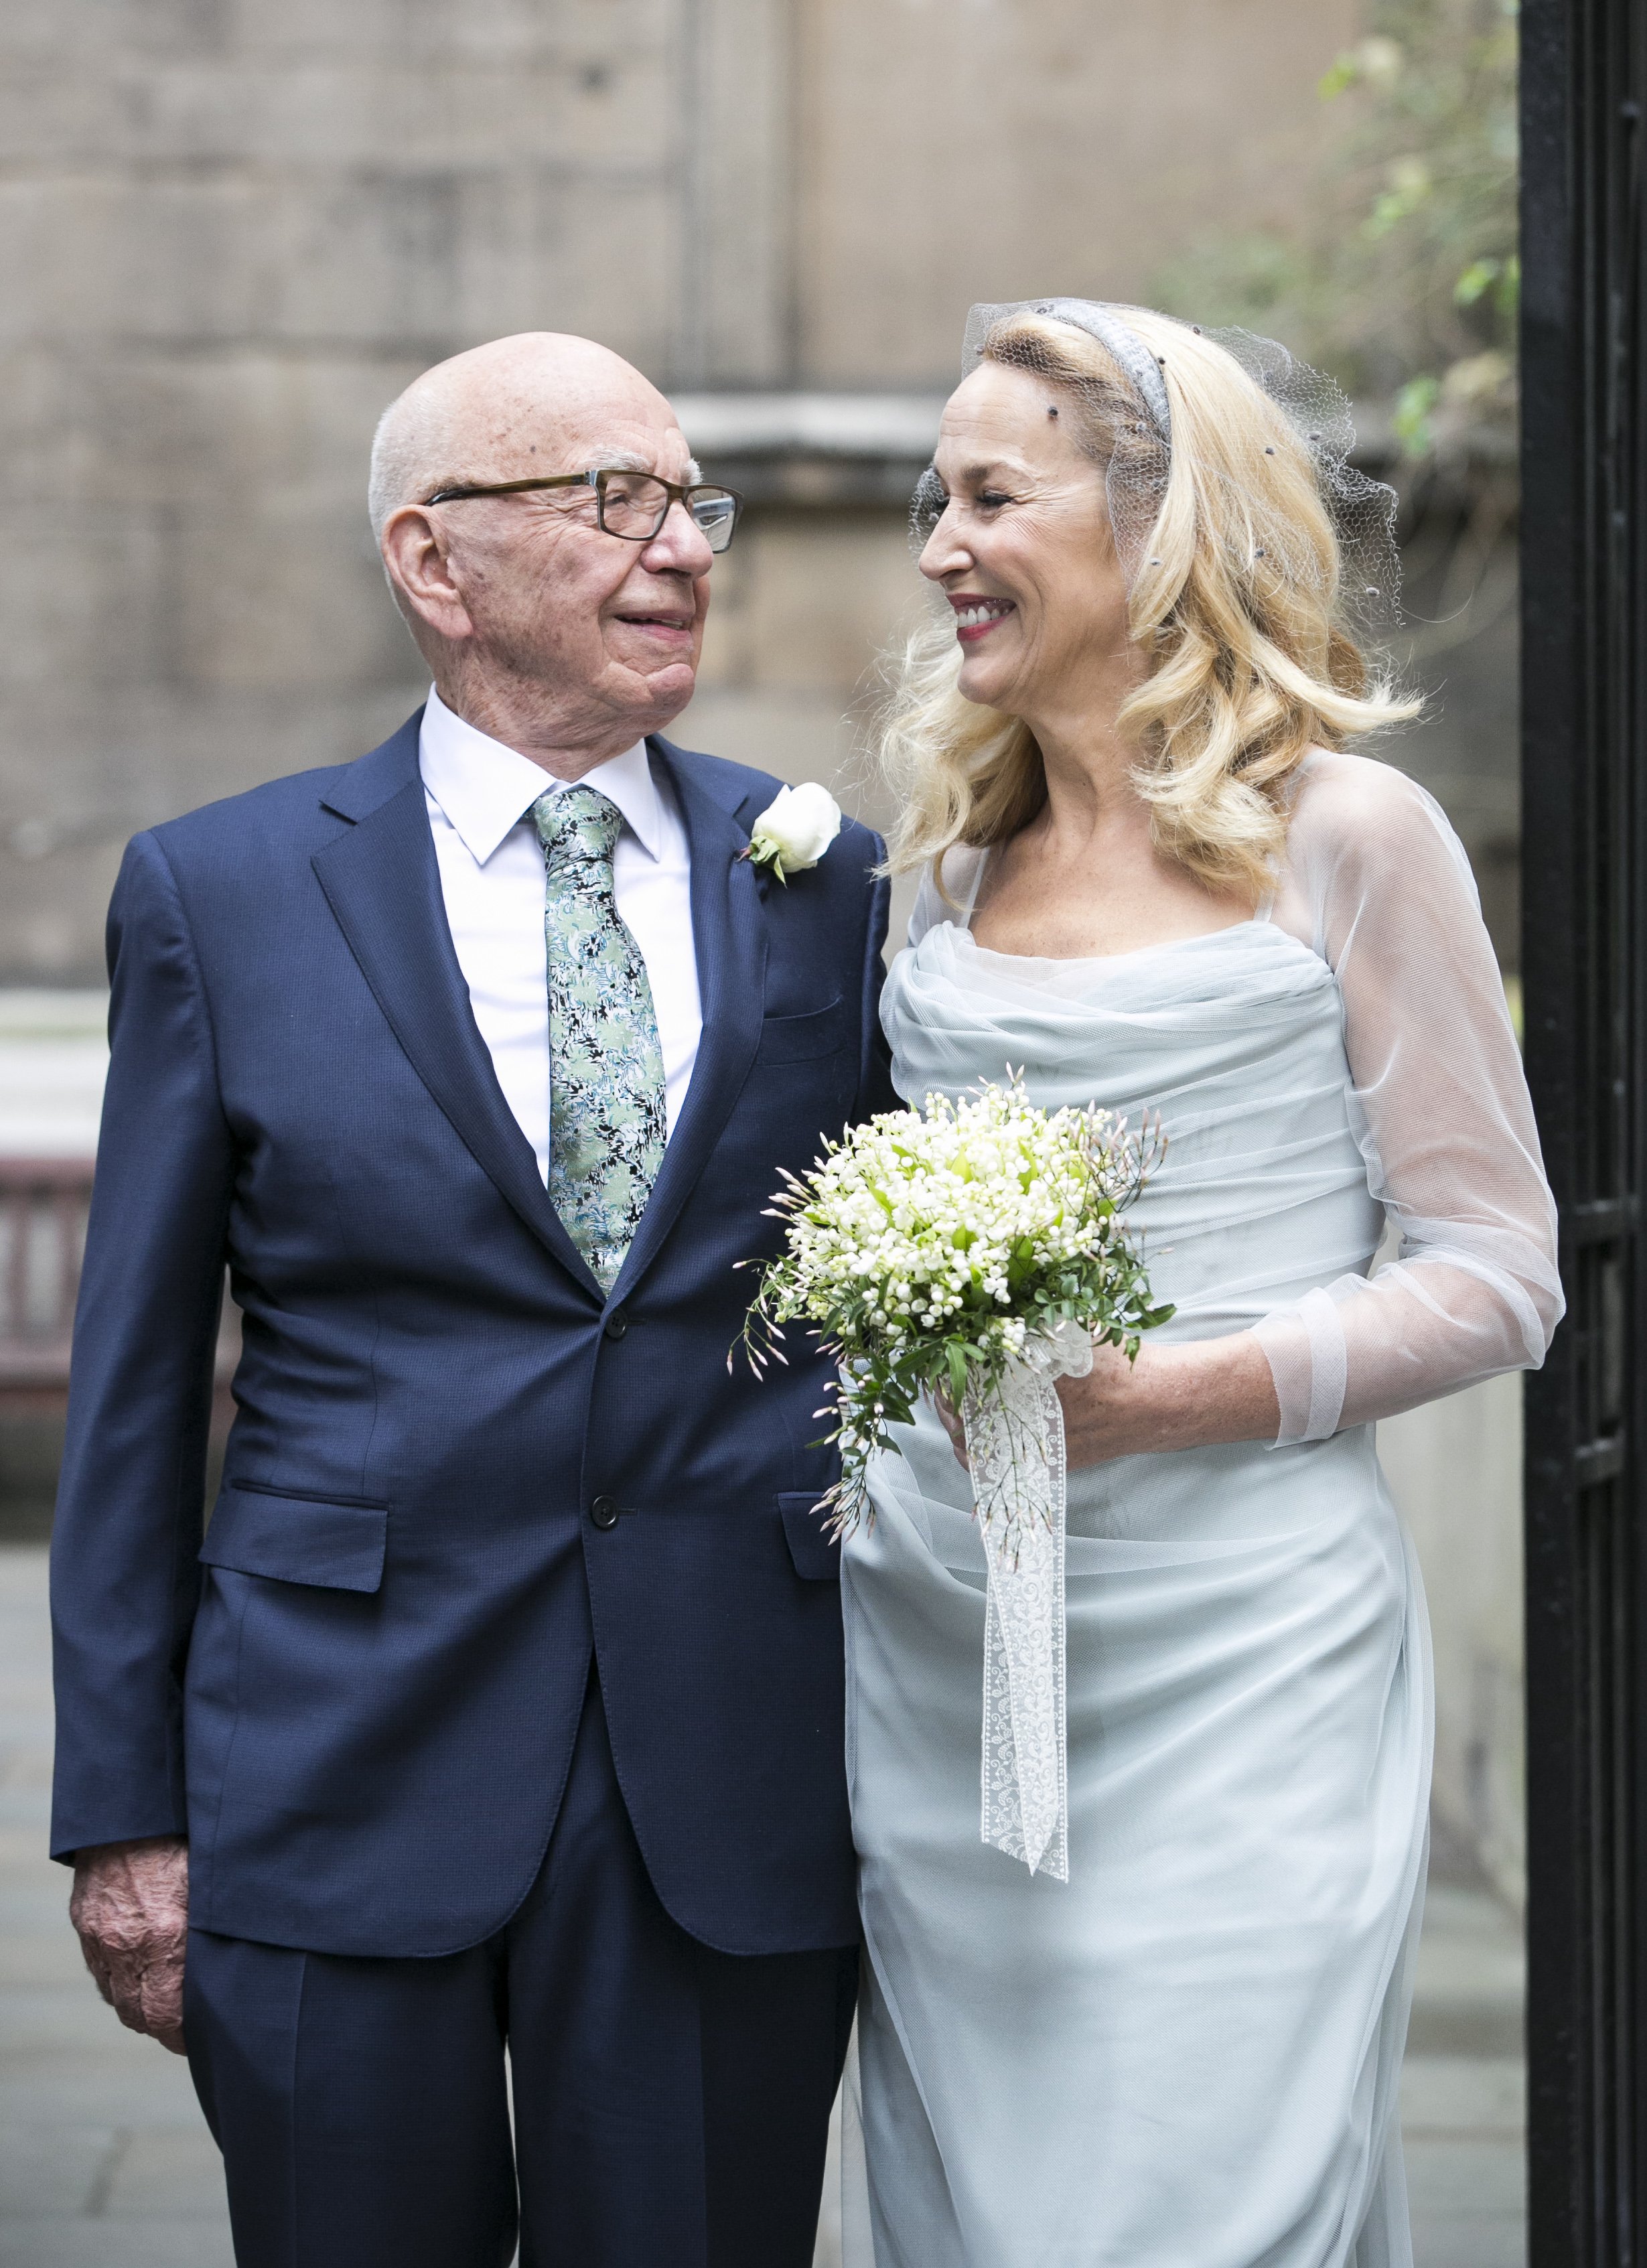 Rupert Murdoch and Jerry Hall seen leaving St. Brides Church after their wedding on March 5, 2016, in London, England. | Source: Getty Images